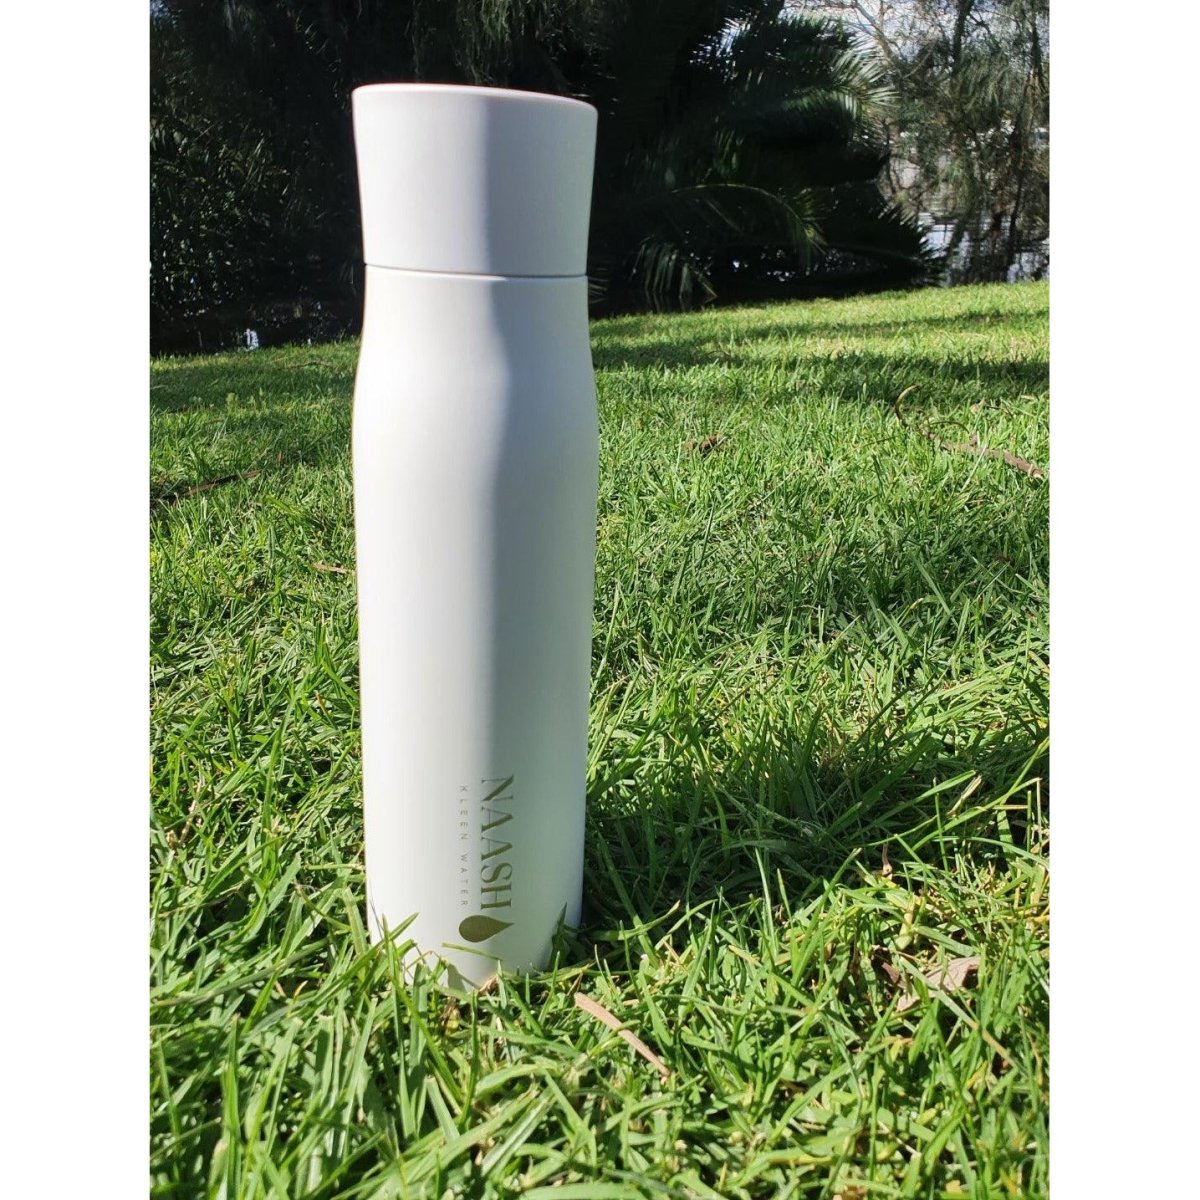 CleanQuench Self-Cleaning HydroFlask - Snow White Naash